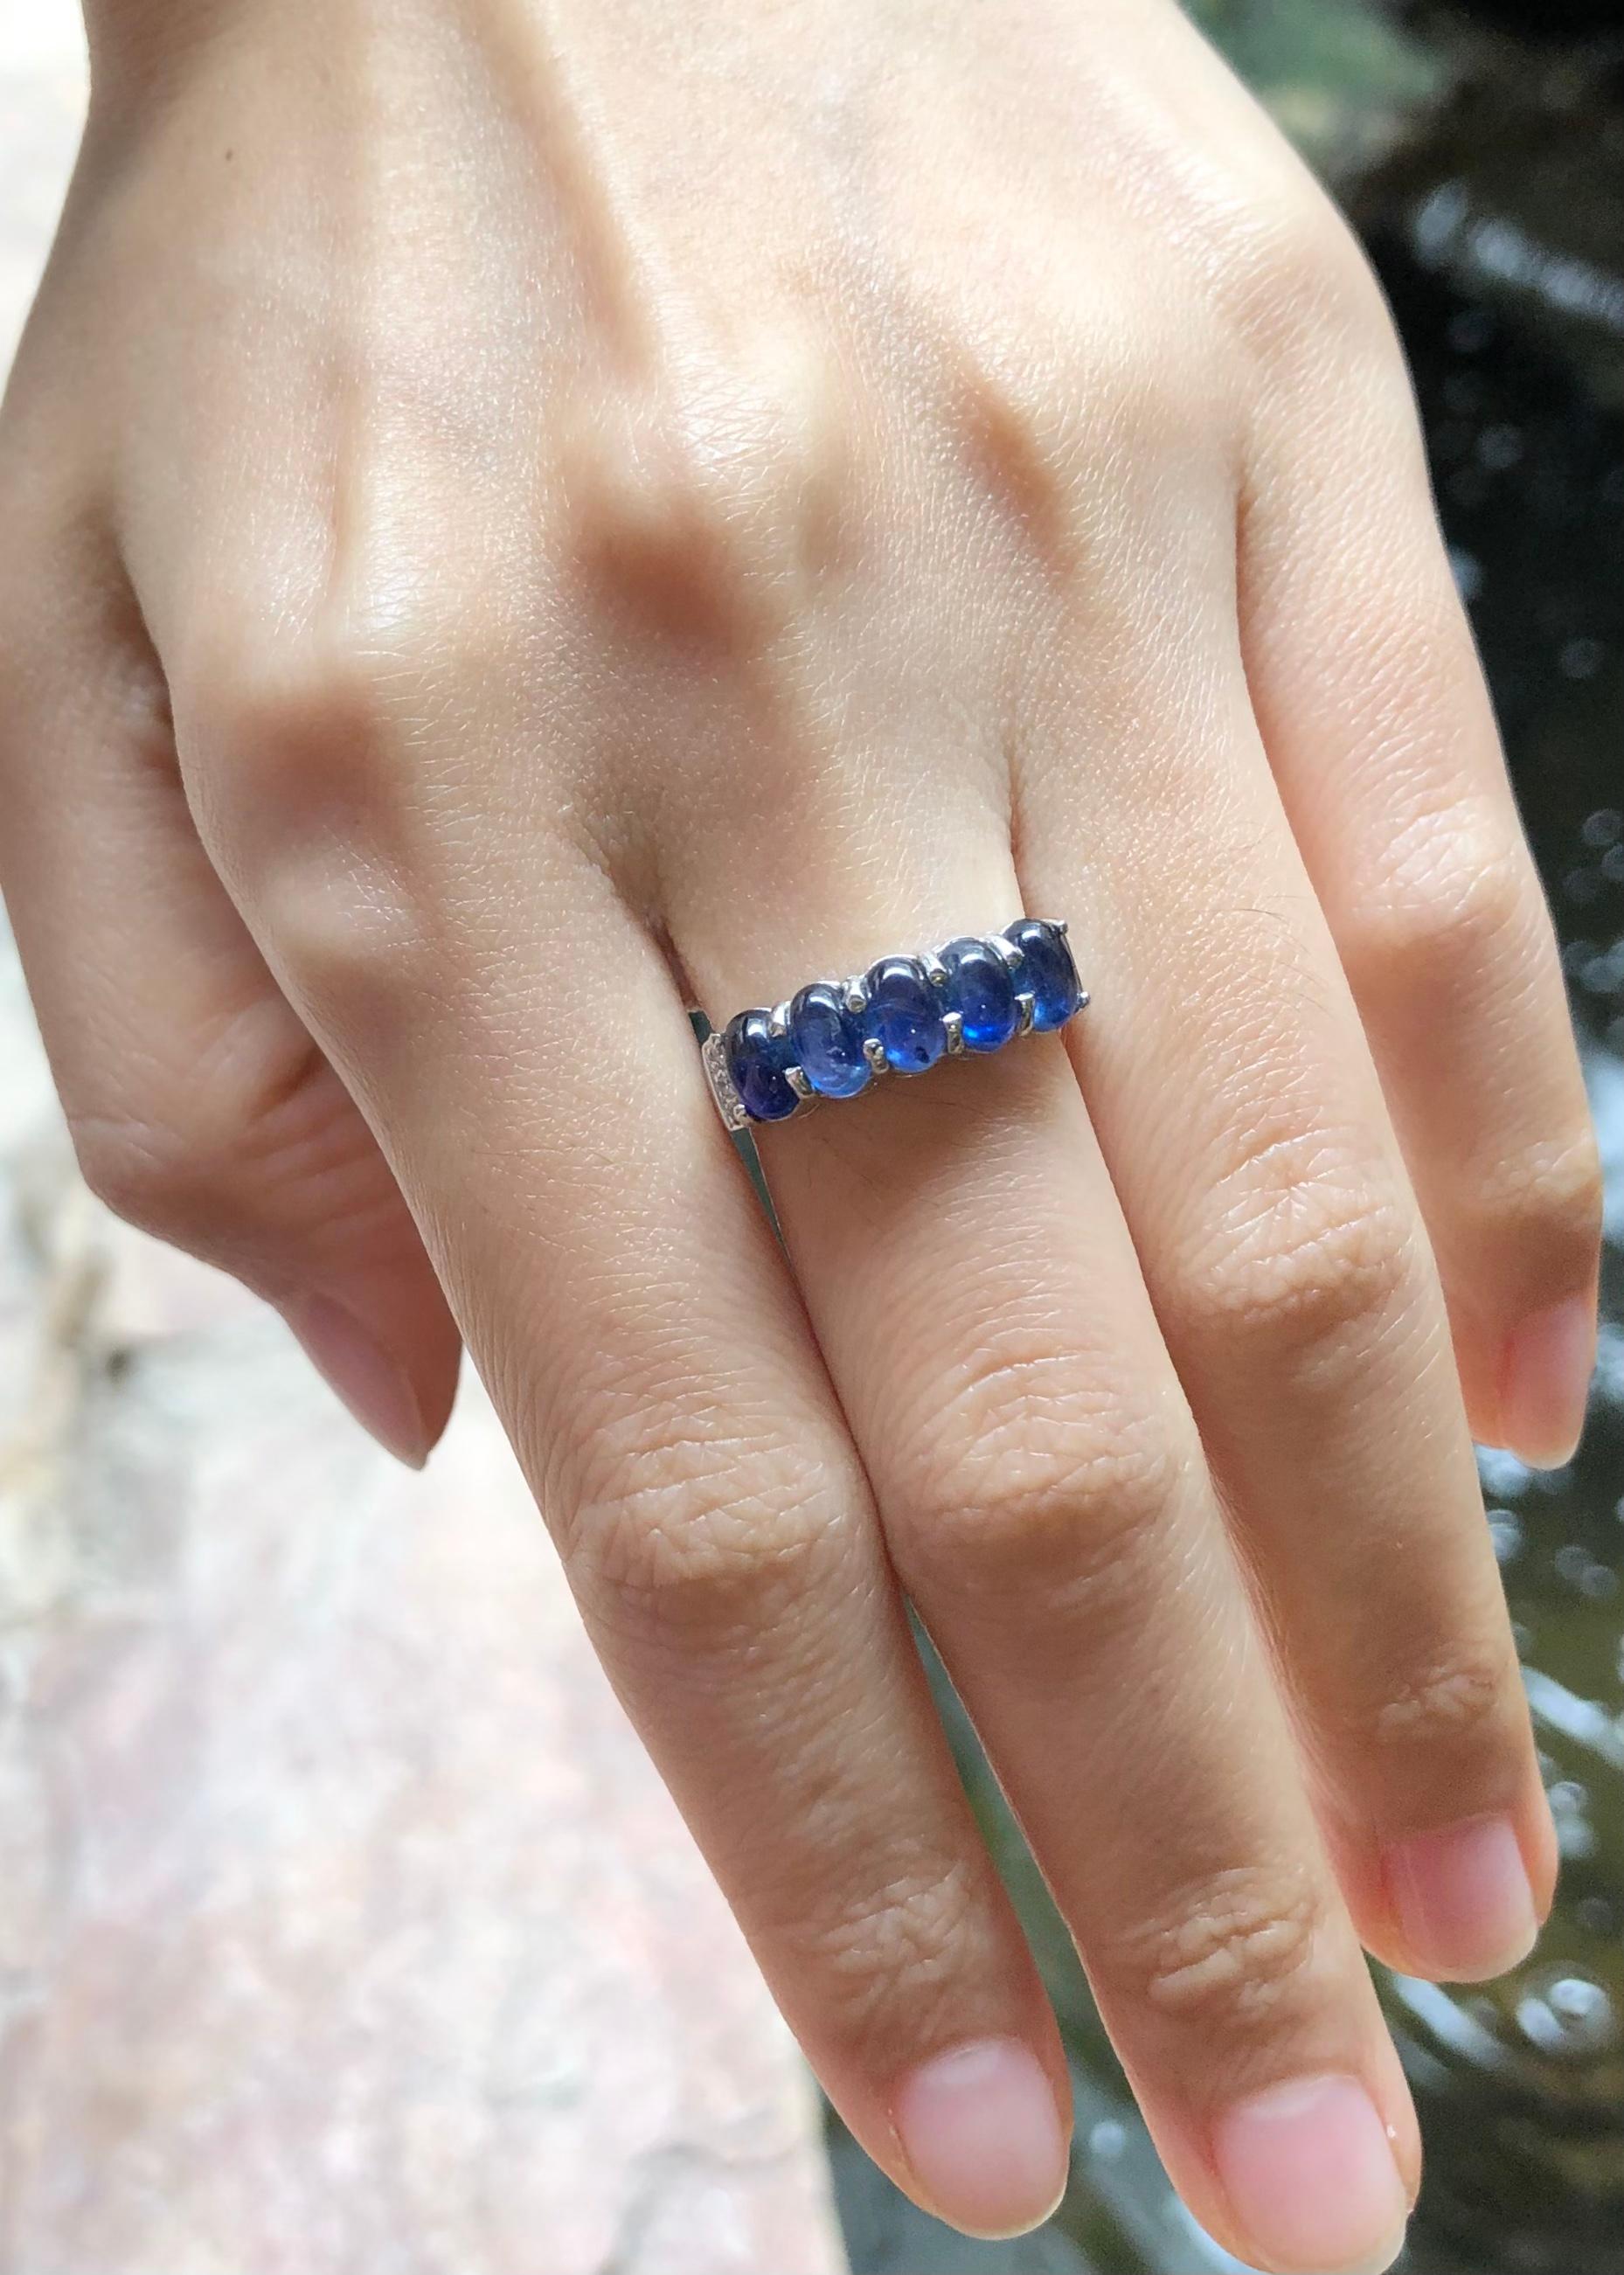 Cabochon Blue Sapphire with Cubic Zirconia Ring set in Silver Settings

Width:  1.8 cm 
Length: 0.6 cm
Ring Size: 52
Total Weight: 3.6 grams

*Please note that the silver setting is plated with rhodium to promote shine and help prevent oxidation. 